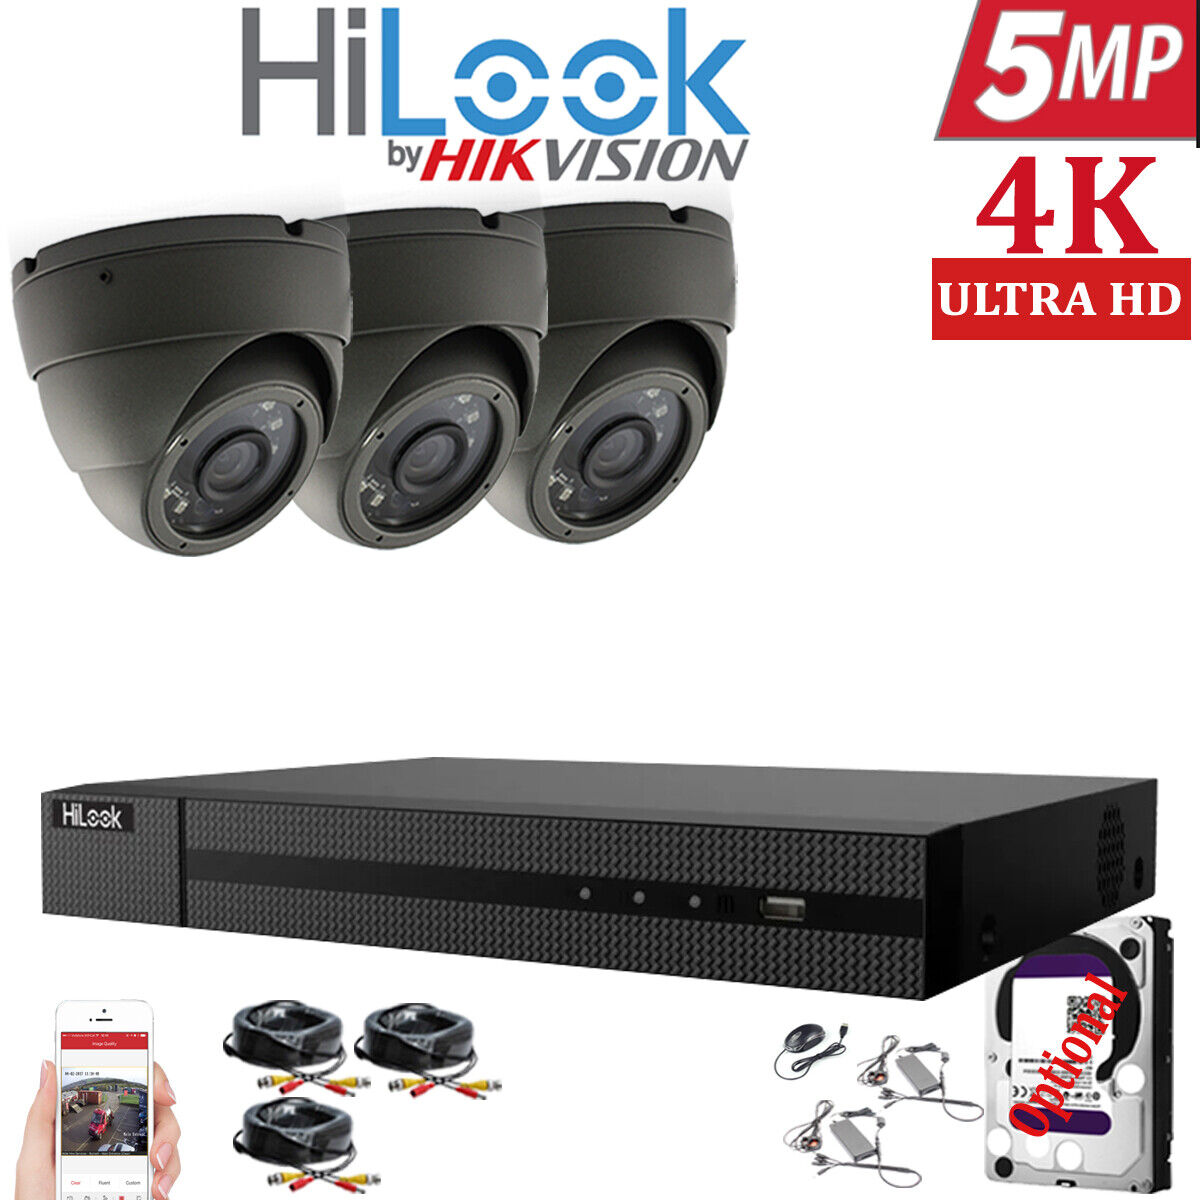 HIKVISION HILOOK 5MP CCTV SYSTEM 4CH DVR FULL HD 20M NIGHT VISION DOME CAMERAS 3x Cameras (Grey) 1TB HDD